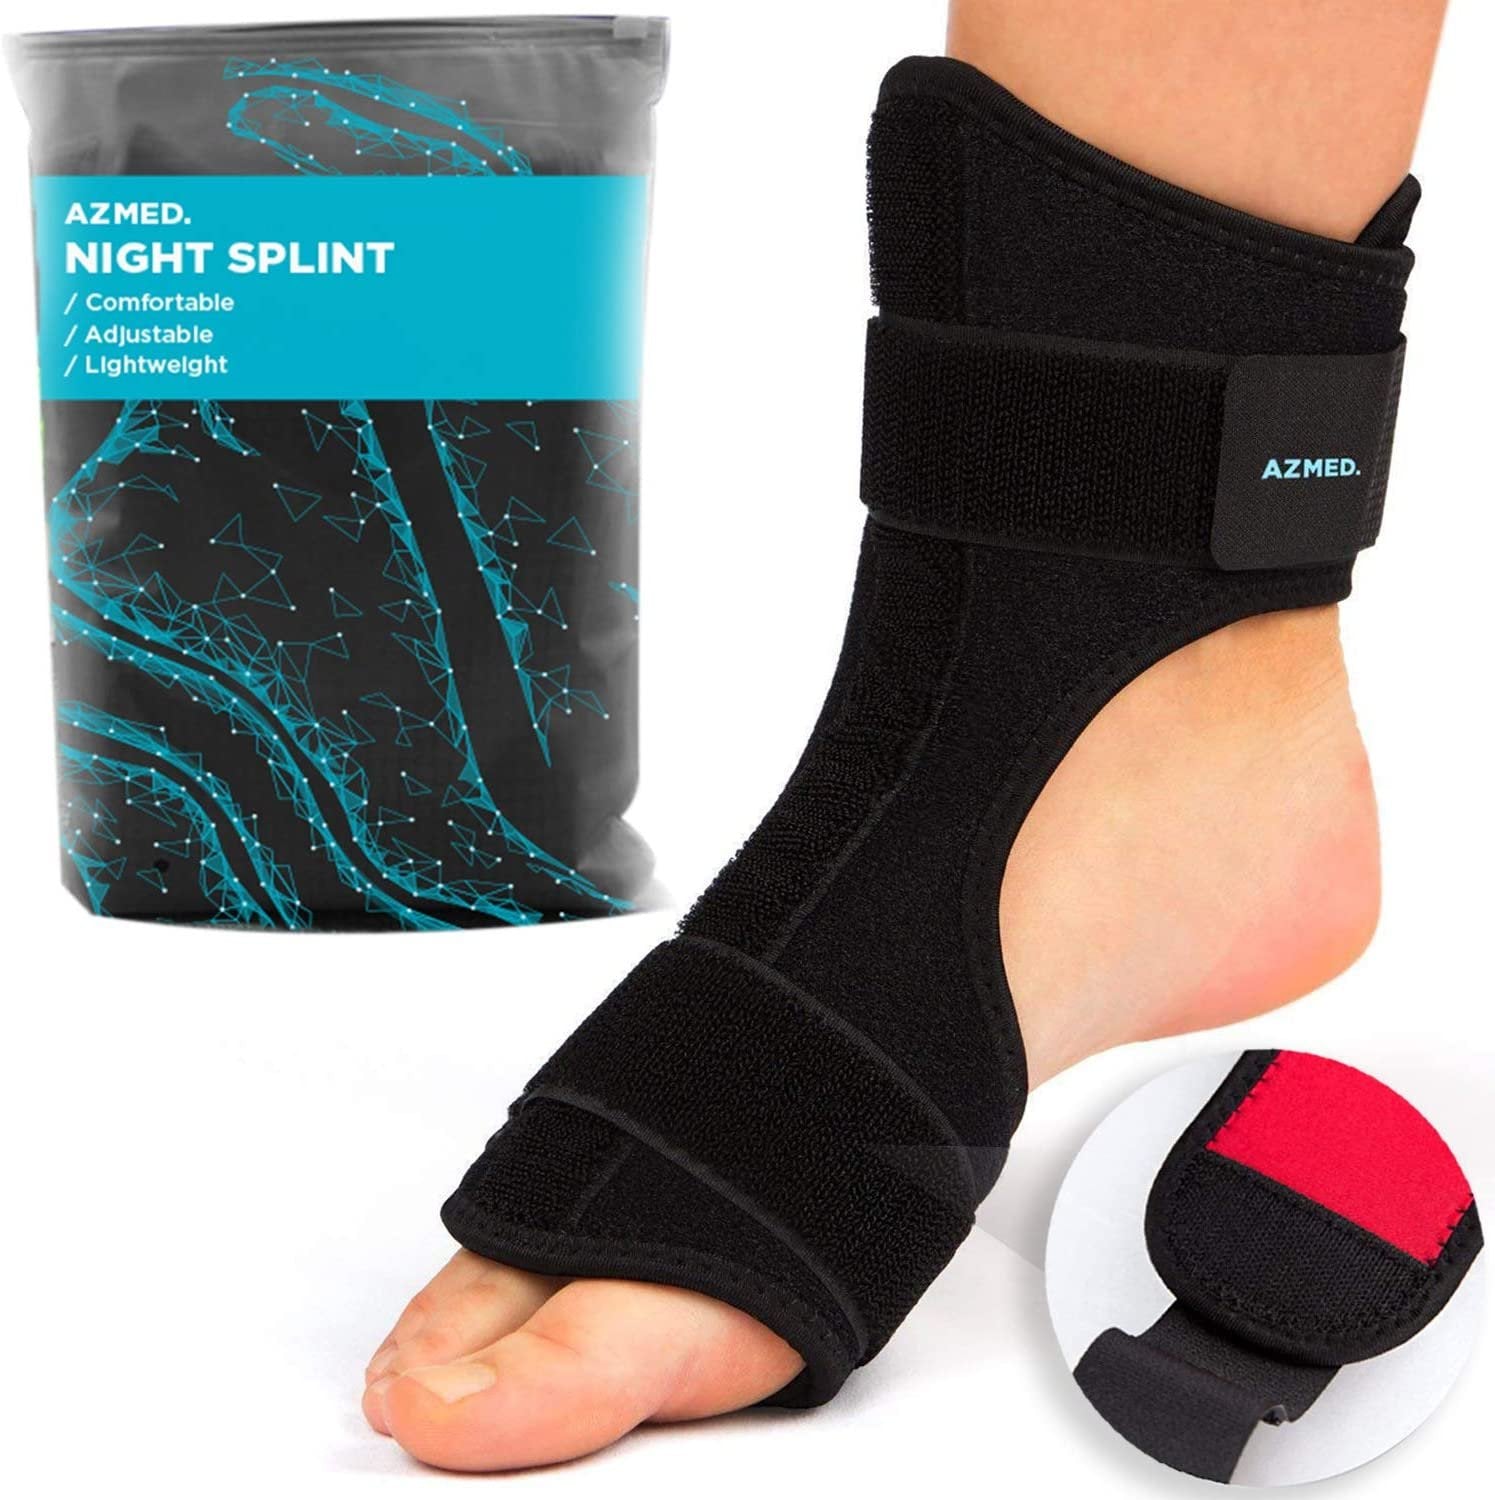 AZMED Plantar Fasciitis Night Splint - Lightweight & Breathable, Black - Adjustable for Foot Drop, Arch Pain, Heel & Ankle Support - Fits Most Feet - Pack of 1